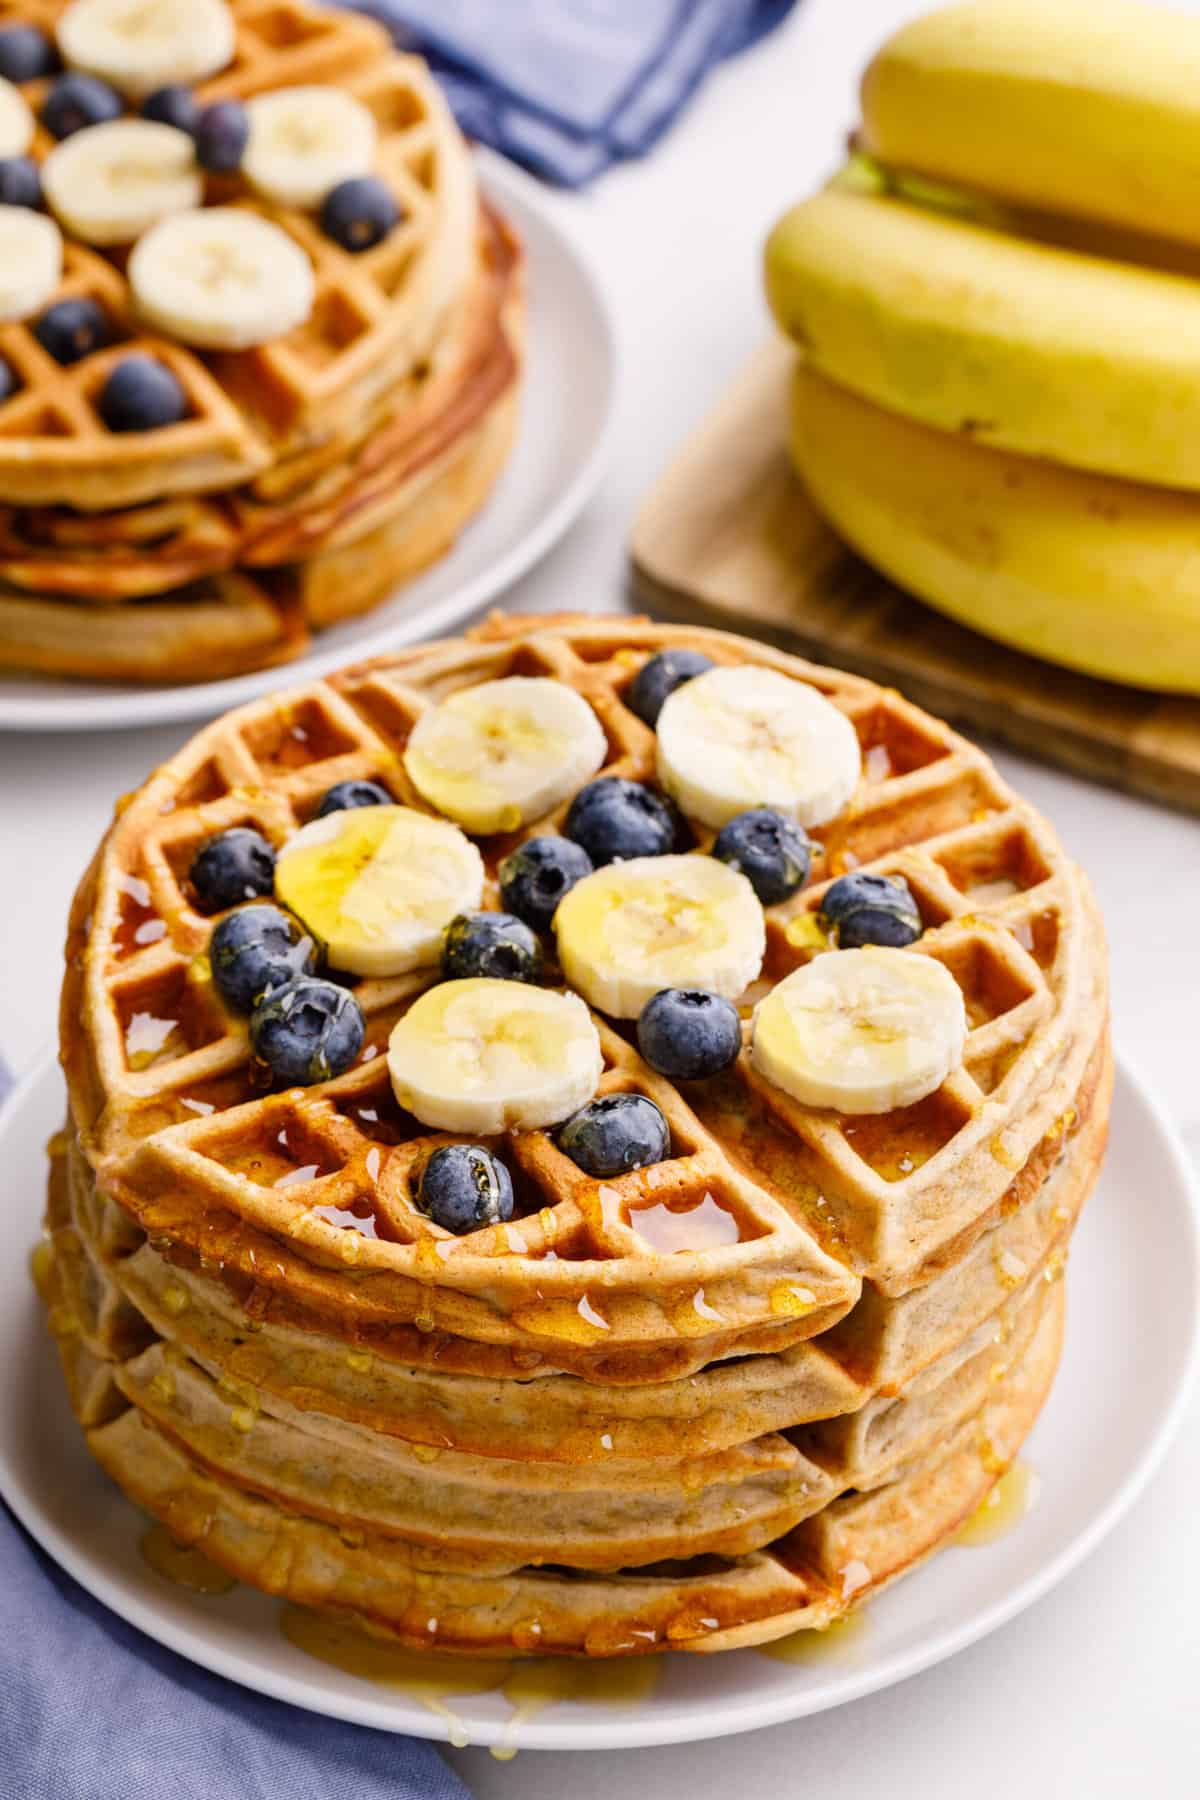 stack of four banana waffles topped with fresh sliced bananas and blueberries with syrup served on a white round plate.